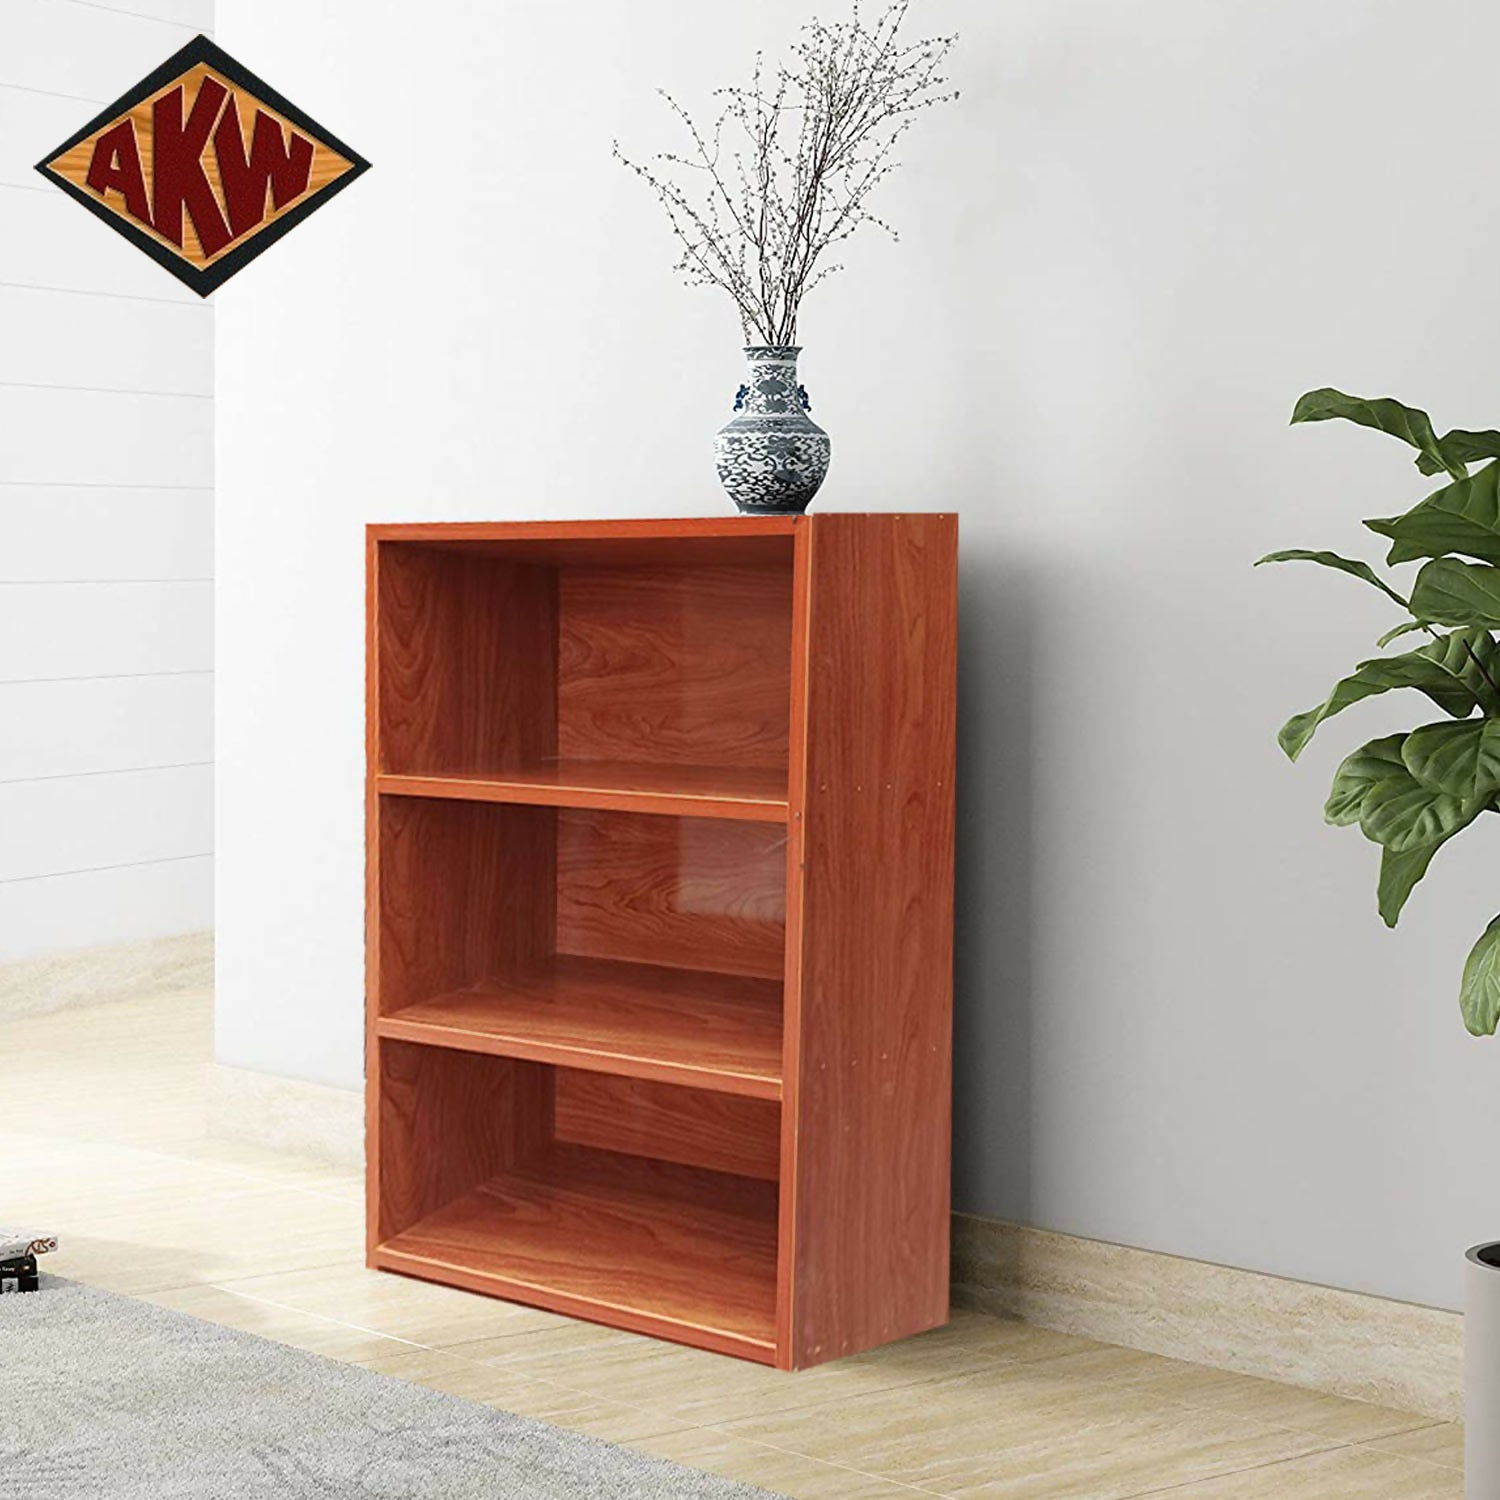 AKW 3-Tier Open Shelf, Espresso Book rack multiples Use Storage Cabinet with Cubes,Office, Kitchen, Closet, Bedroom, Living Room, Study Room, Nursery for kids bag...